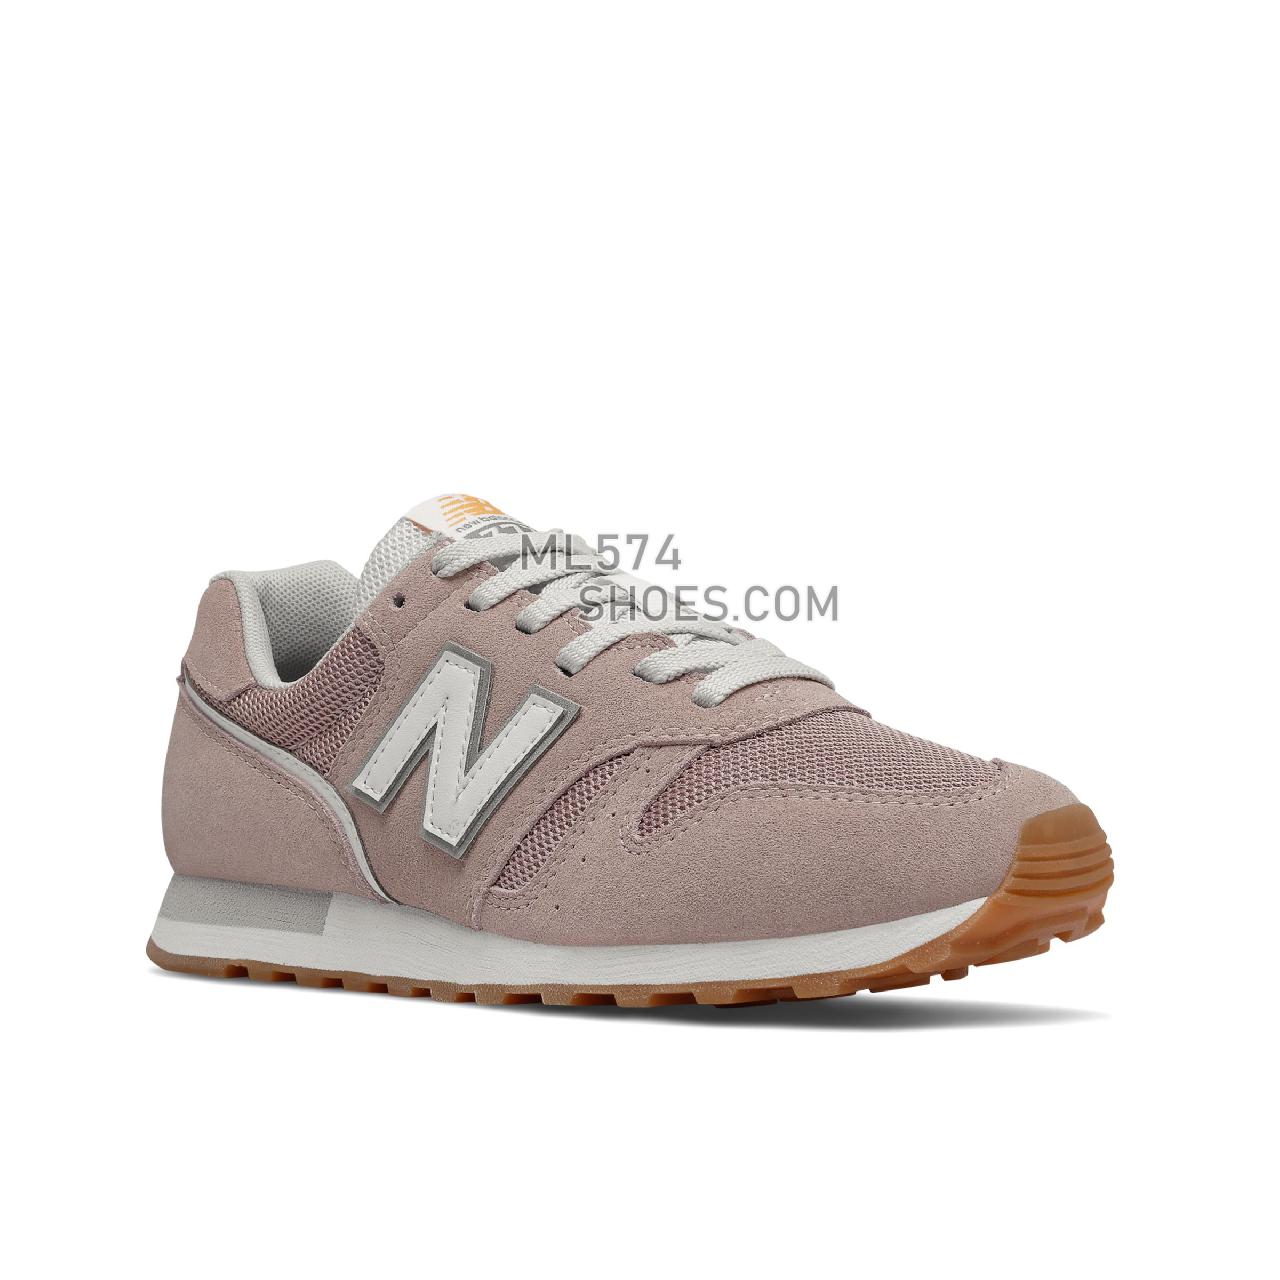 New Balance 373V2 - Women's Classic Sneakers - Au Lait with White - WL373HR2